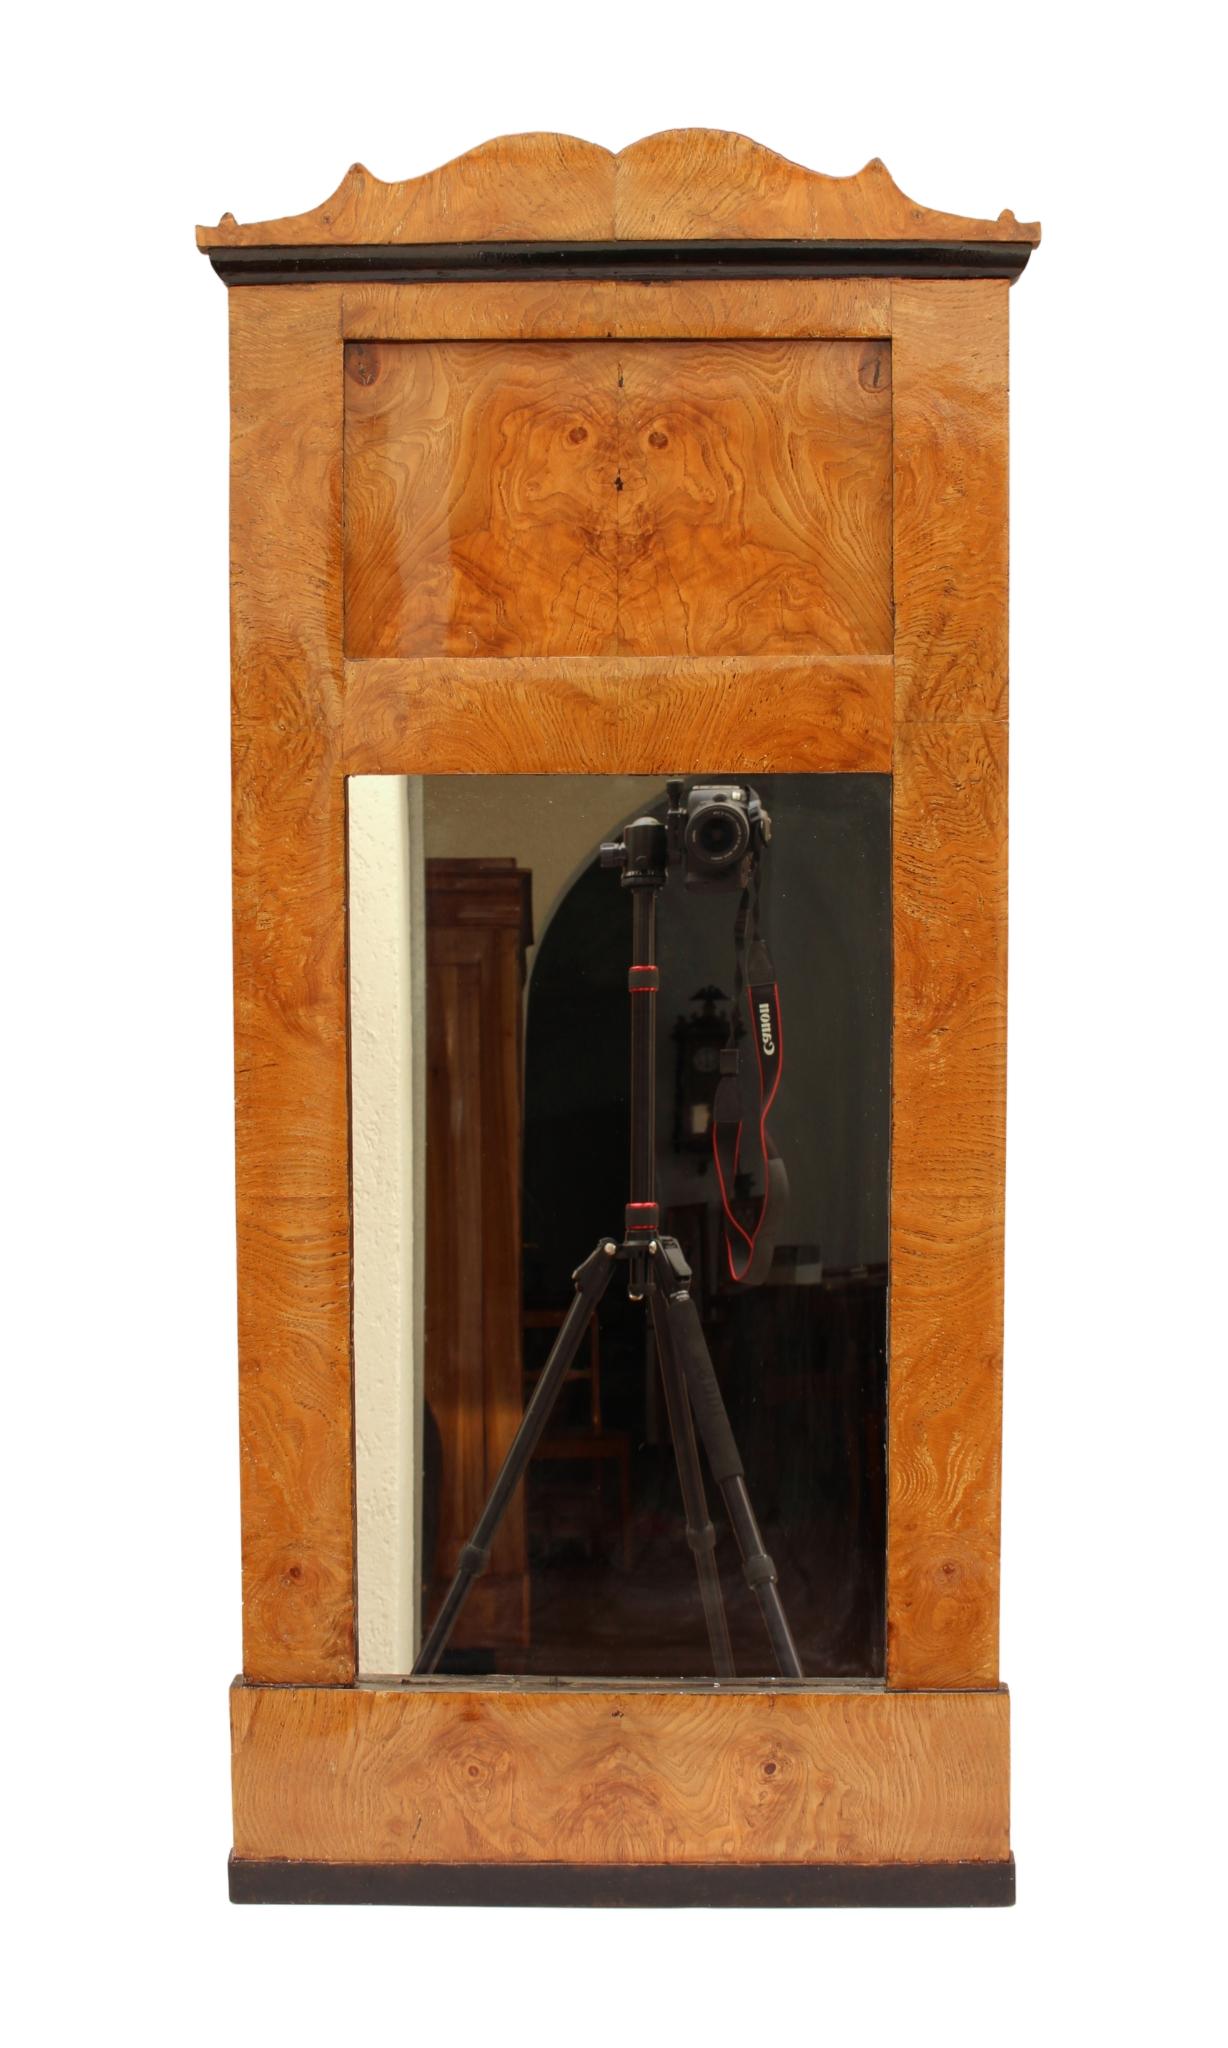 The Biedermeier mirror dates from around 1830 and was made from ash wood. The mirror has a nice medium size and a beautiful veneer pattern, the base and geison is ebonized. The mirror is in good restored condition.